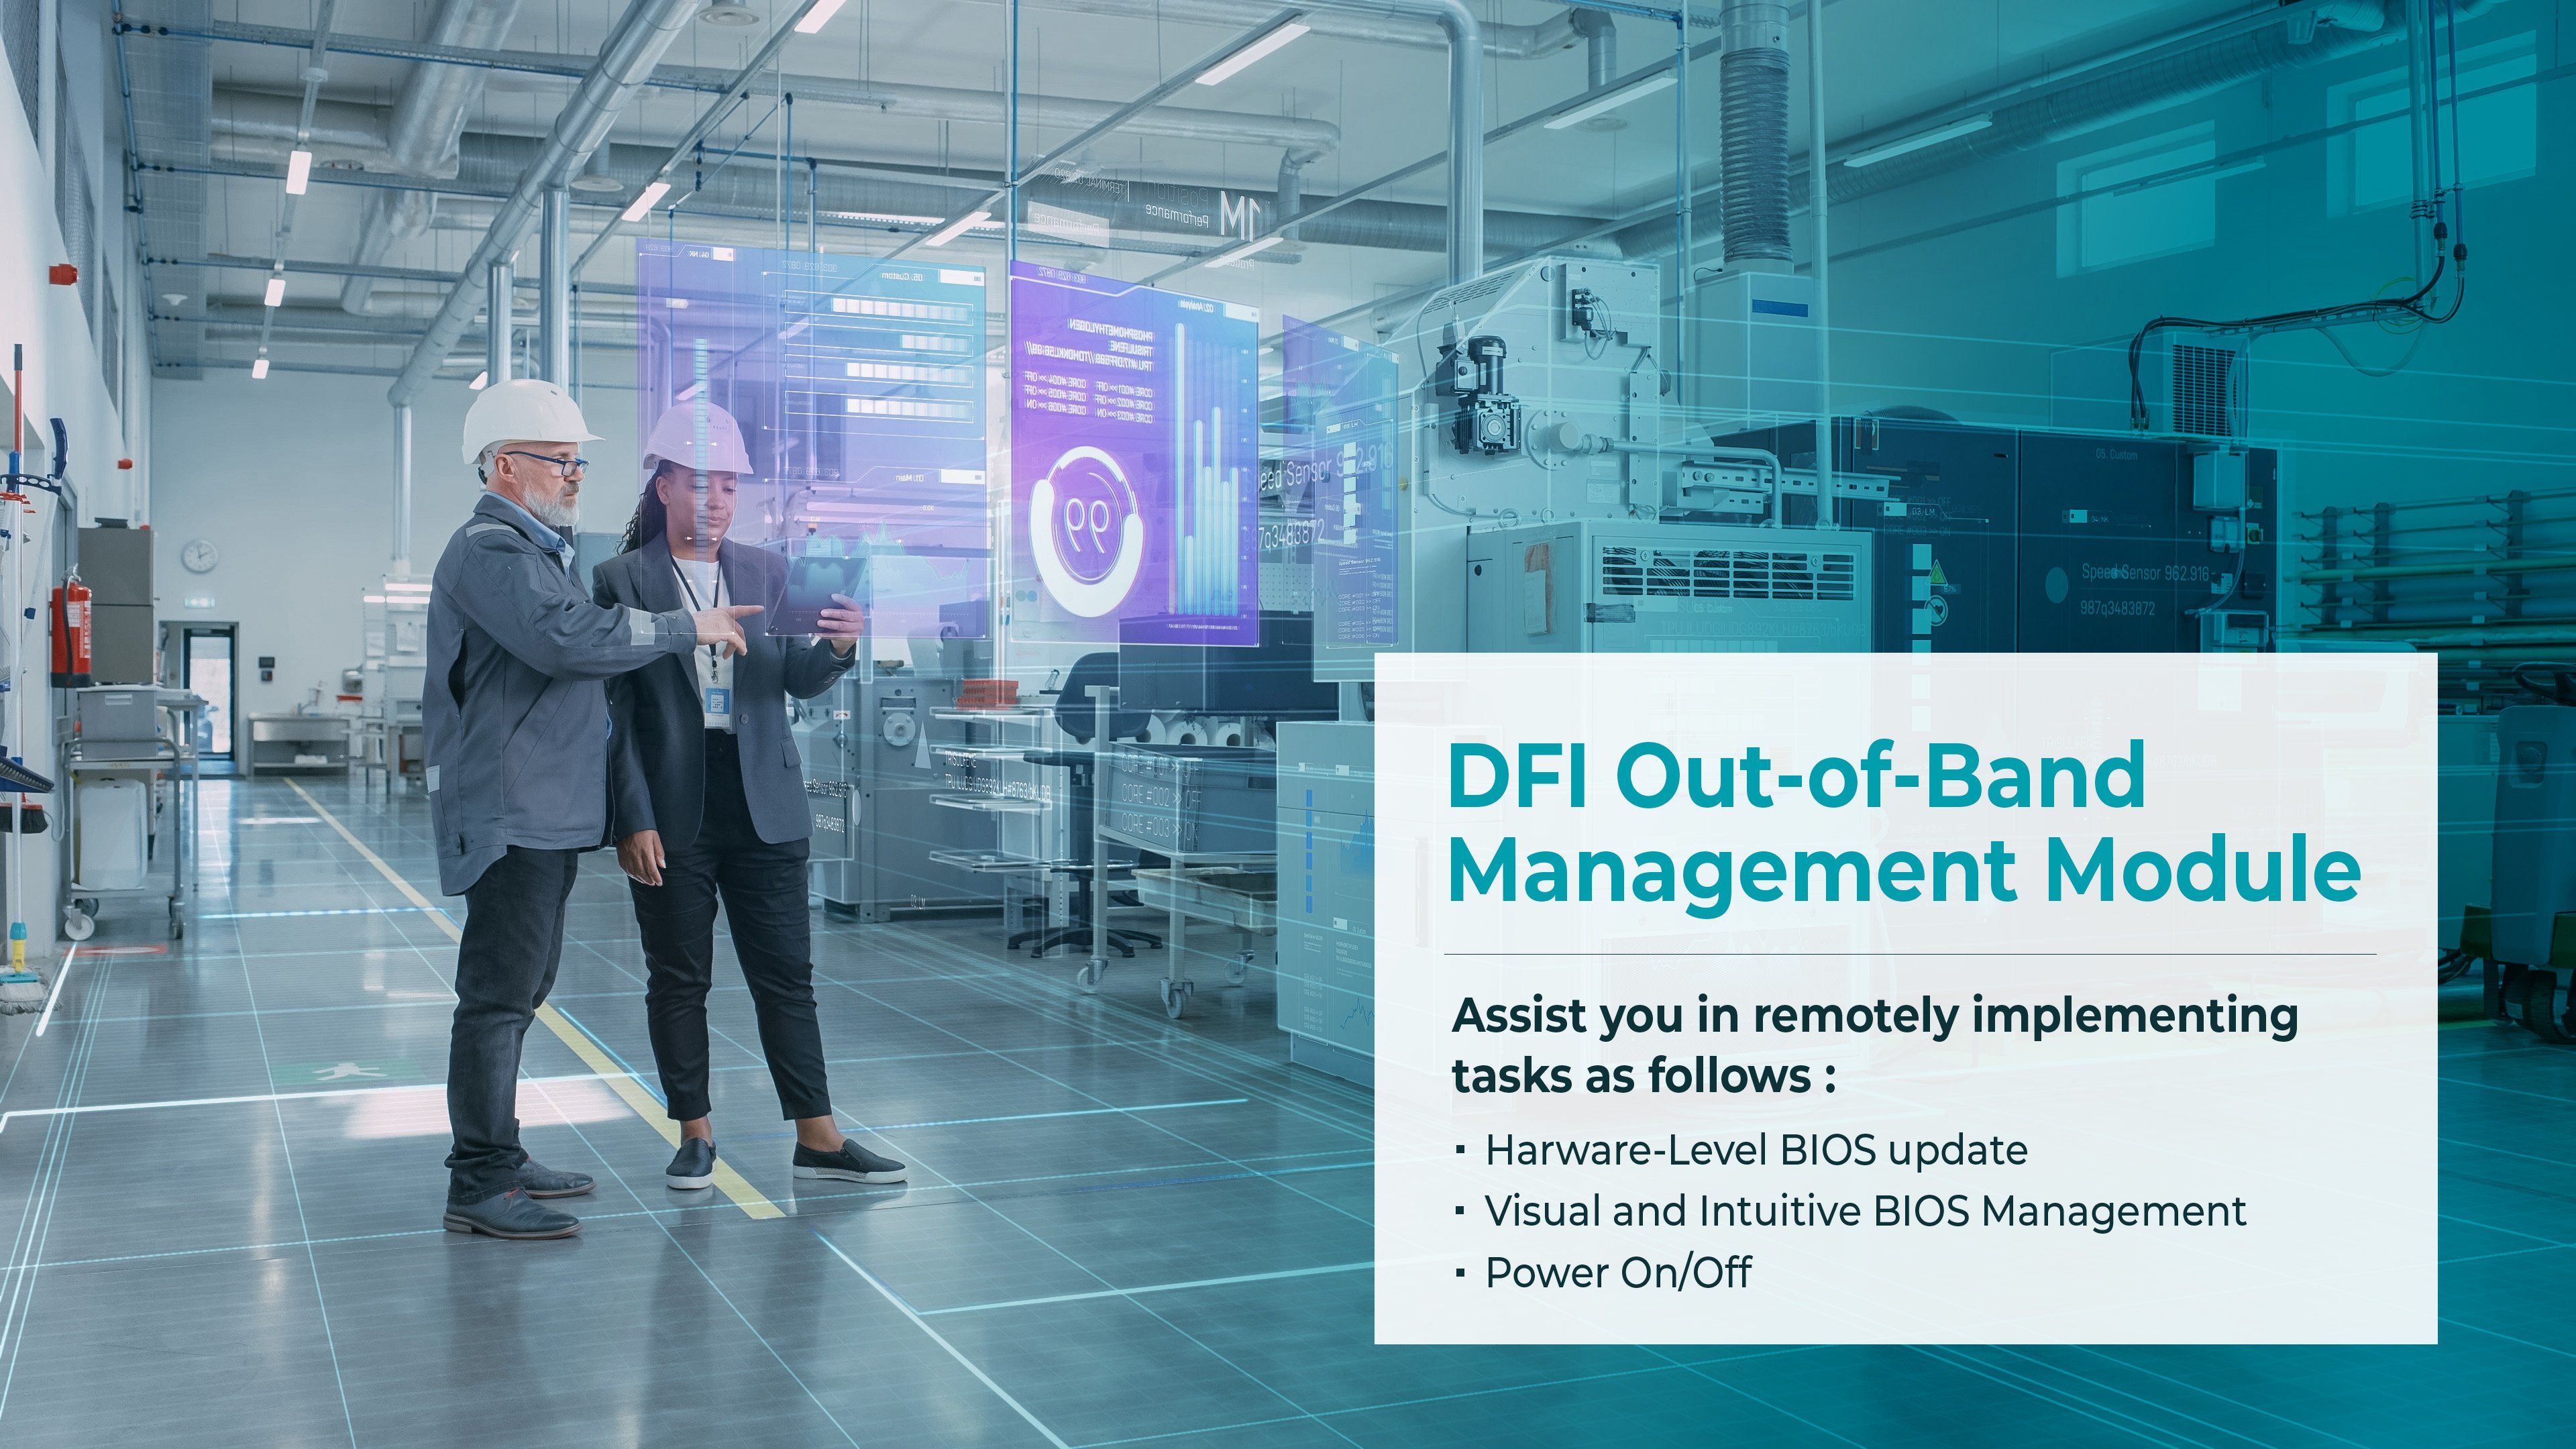 Blog-DFI Out-of-Band Management Module